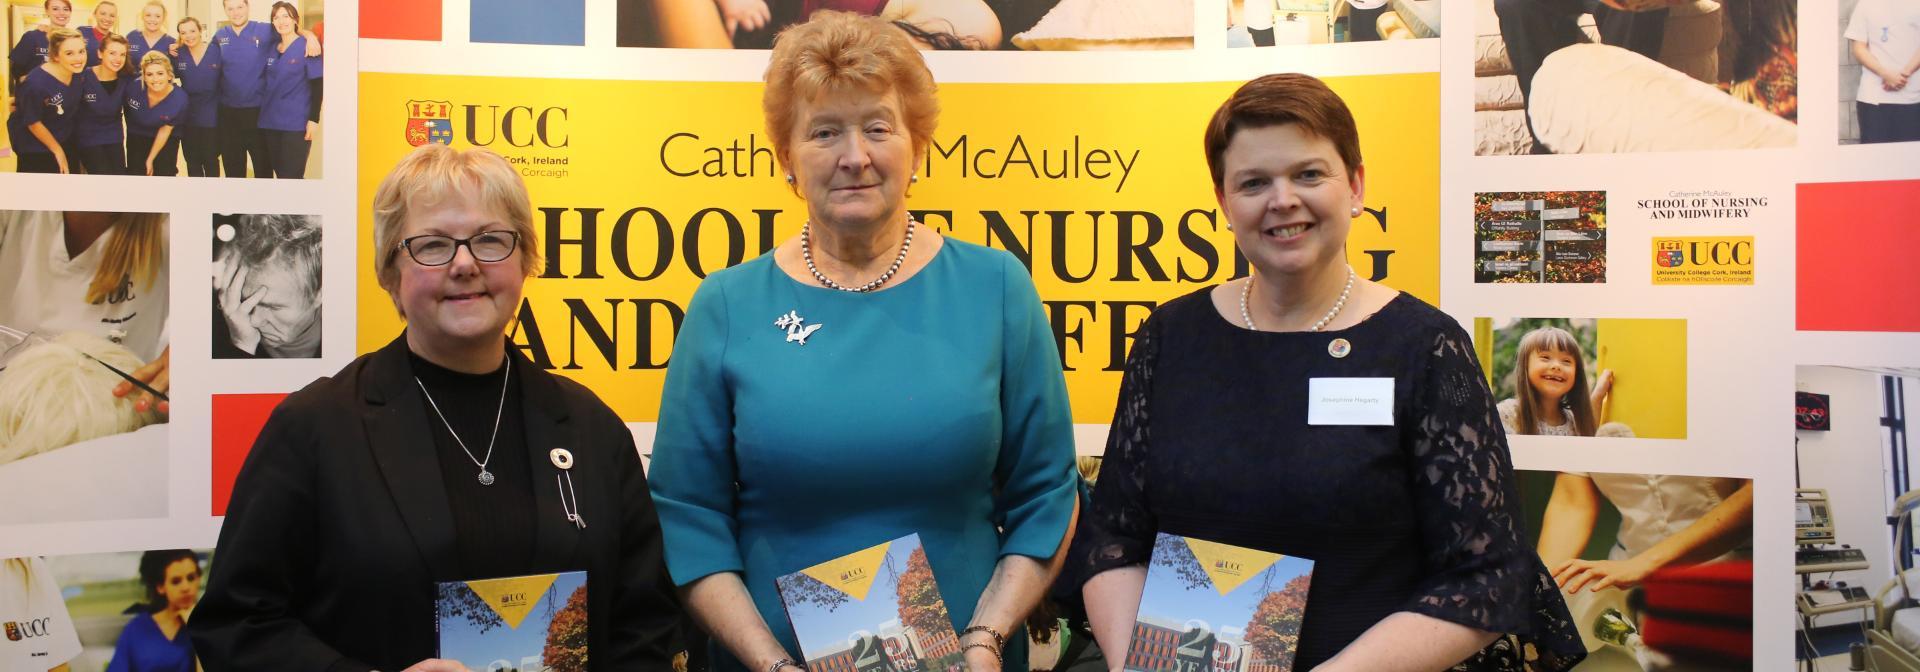 25 Years of Nursing & Midwifery UCC Book Launch